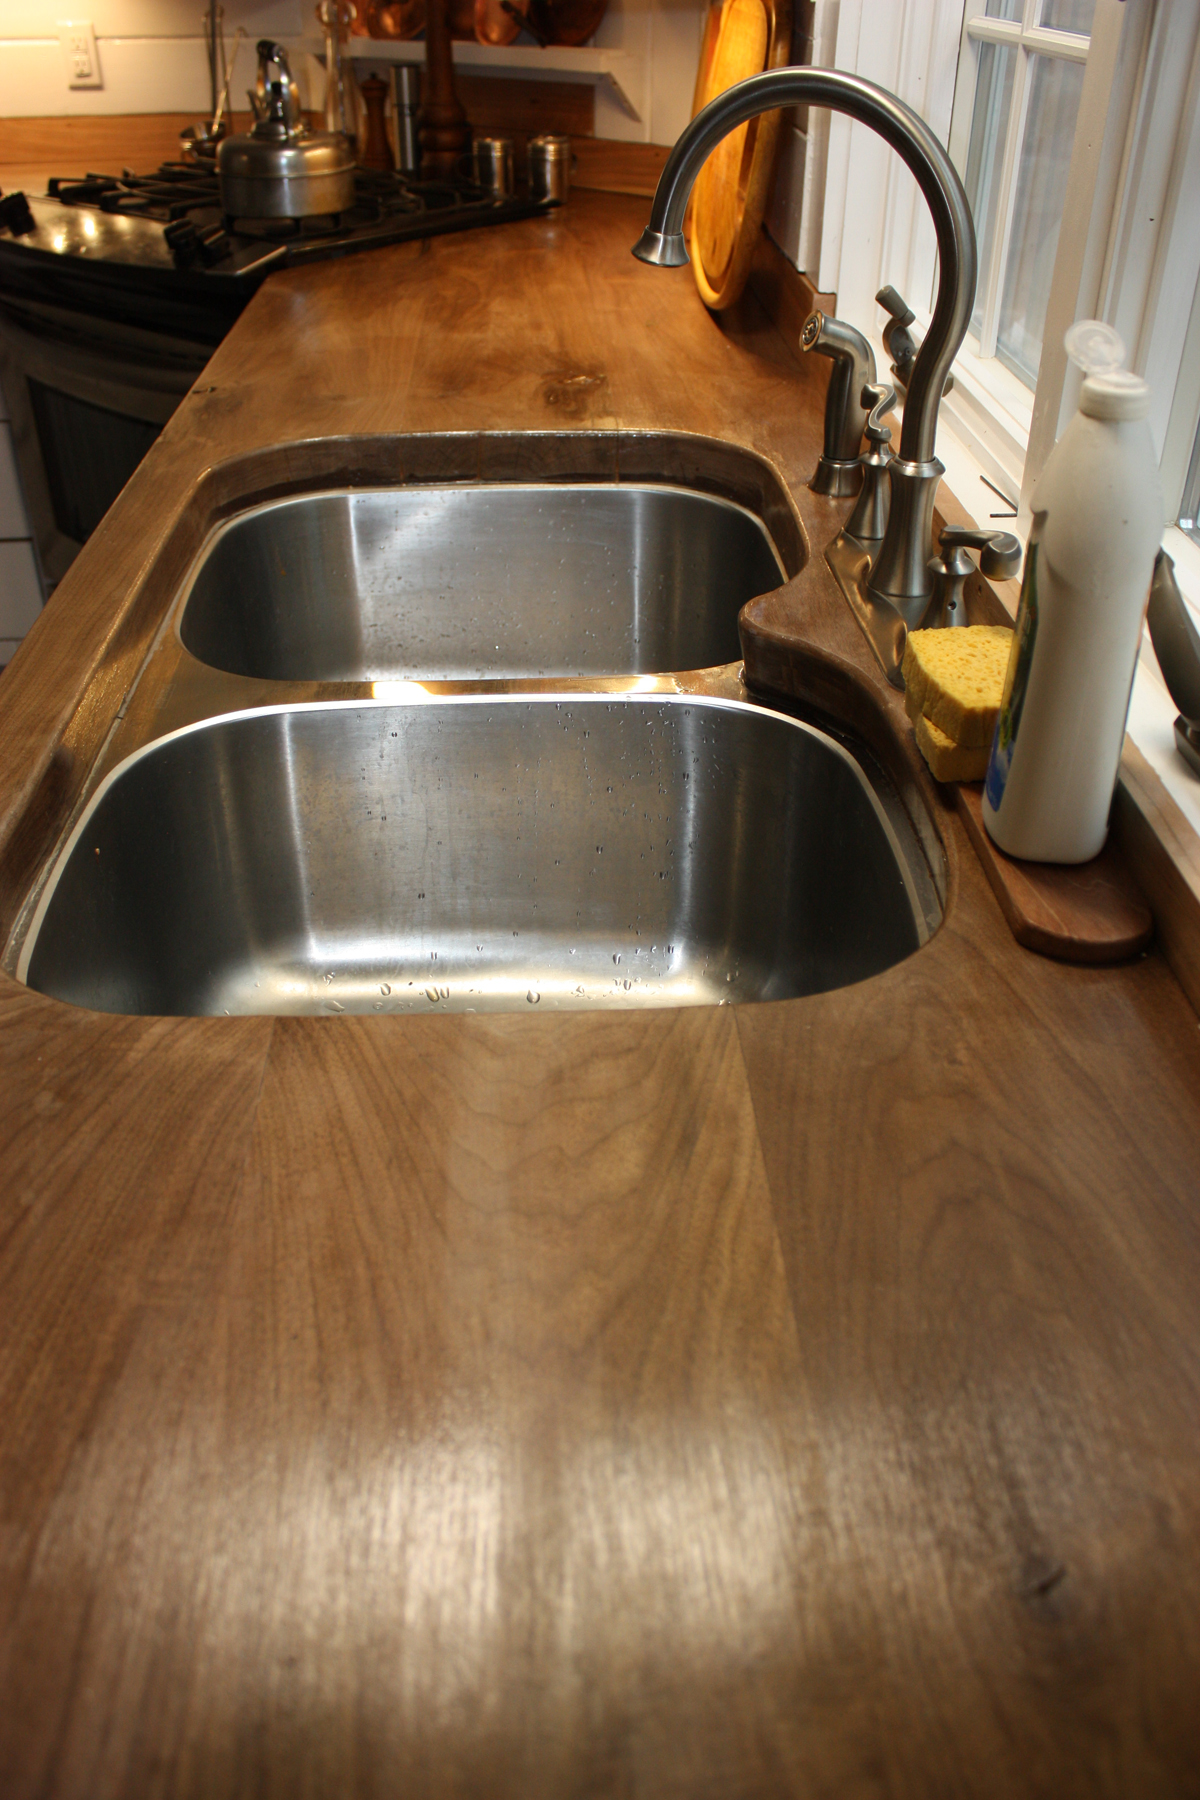 How To Seal A Solid Wood Countertop Safely, How To Make Wood Countertops Food Safe